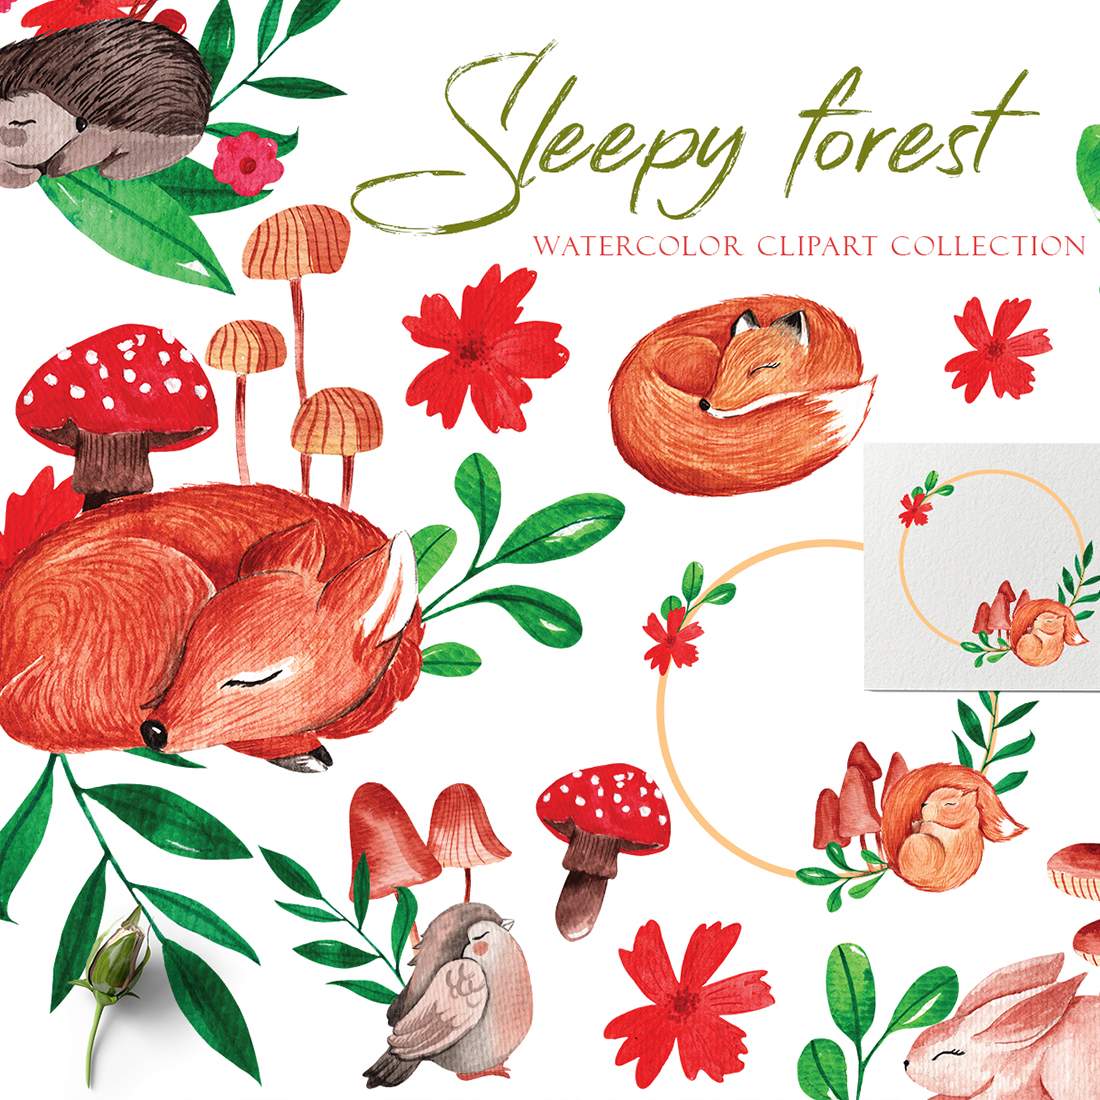 Sleepy Forest woodland animals Watercolor Clipart Set cover image.